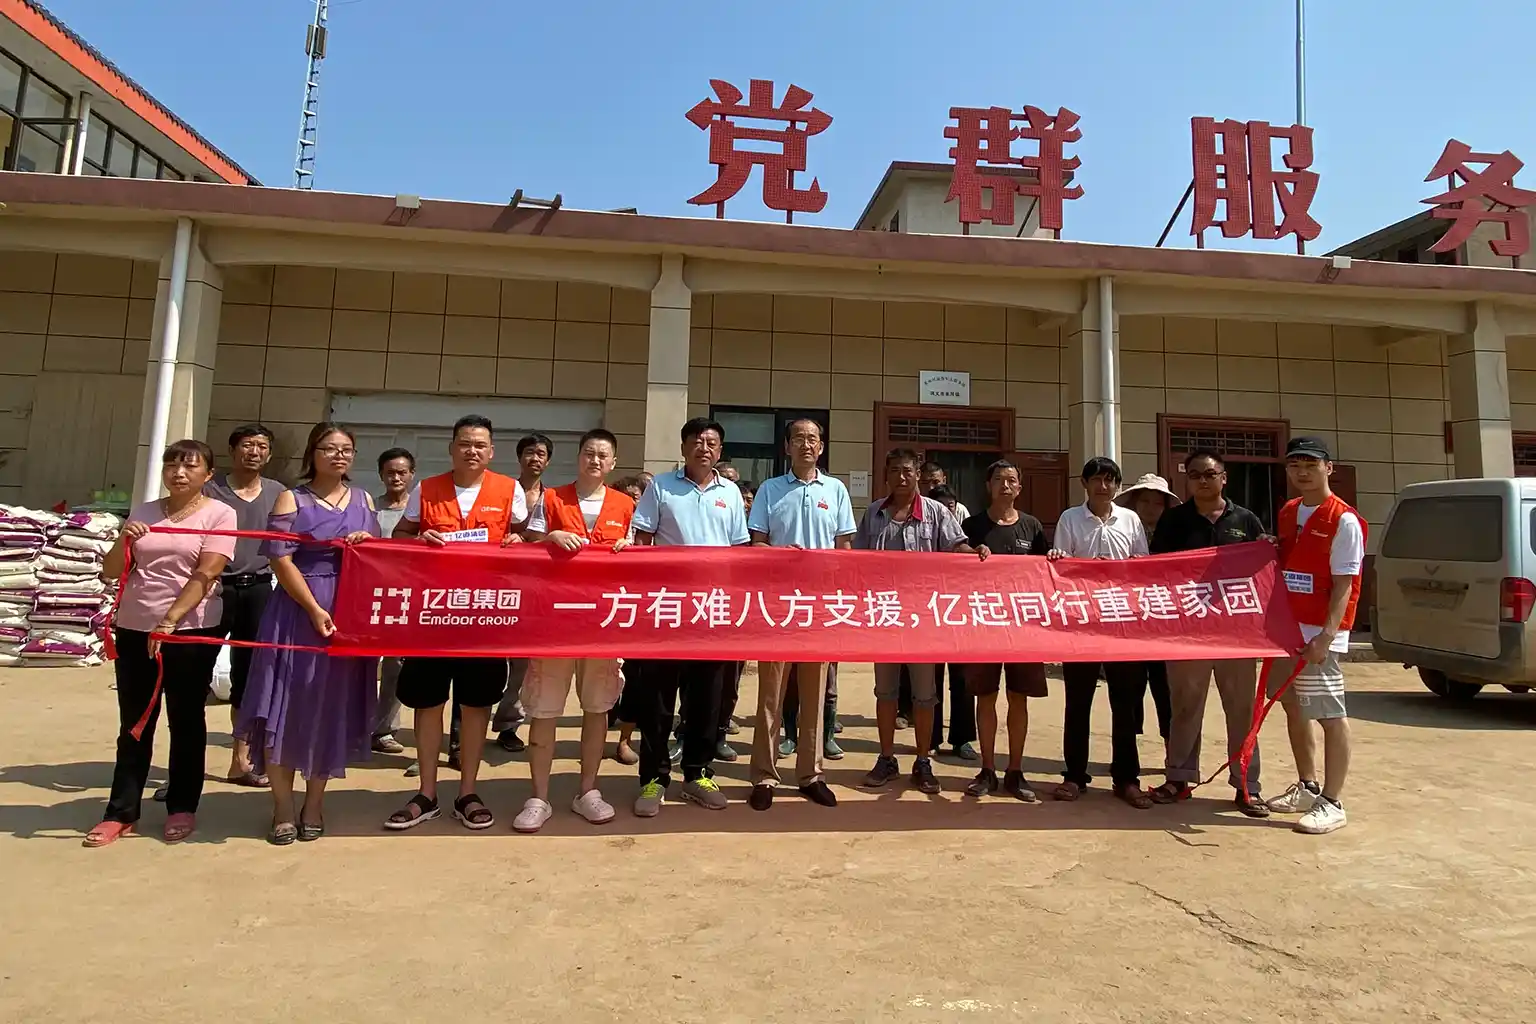 Emdoor Group Delivery Living Material To Help Henan Flood Victims